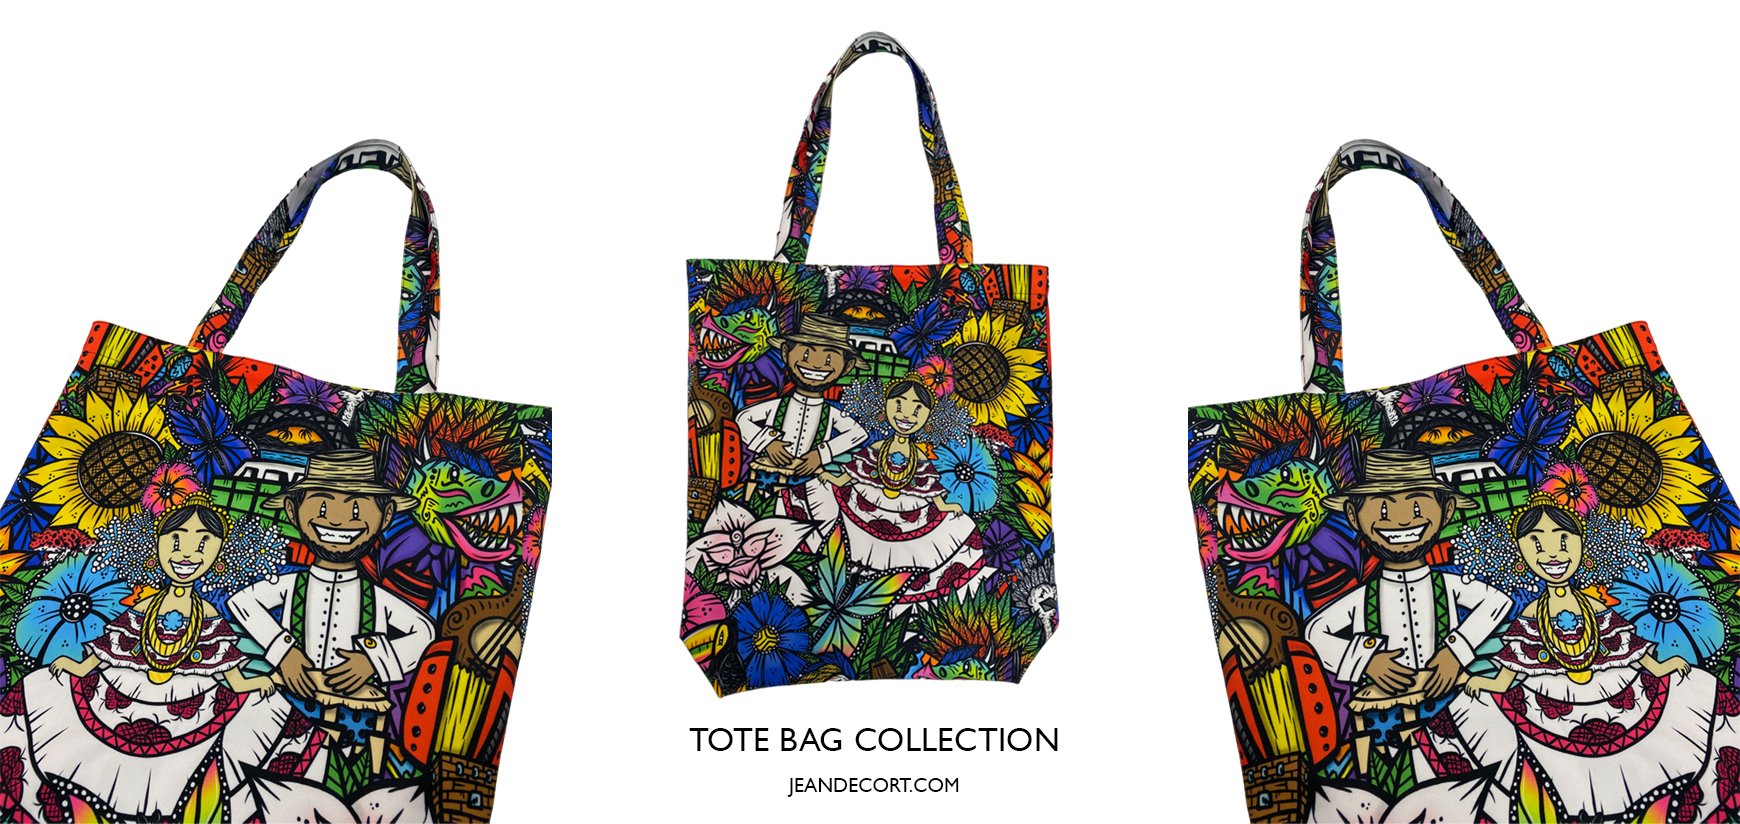 TOTE BAG COLLECTION